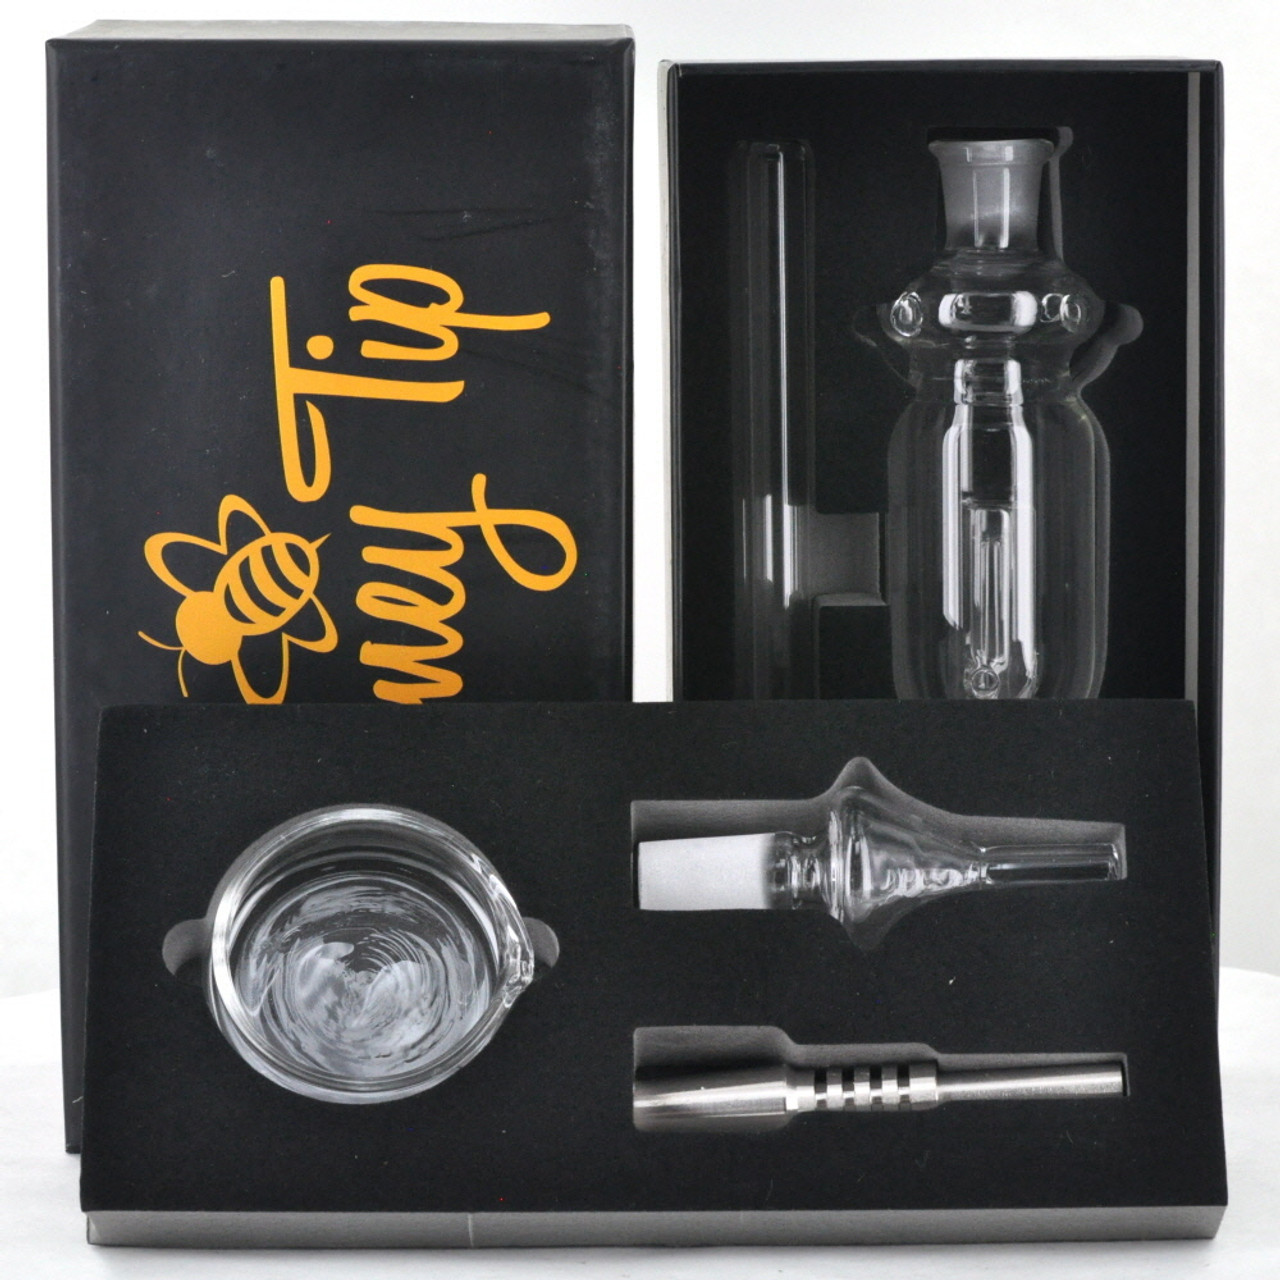 14mm Nectar Collector Tip Kit -sitename